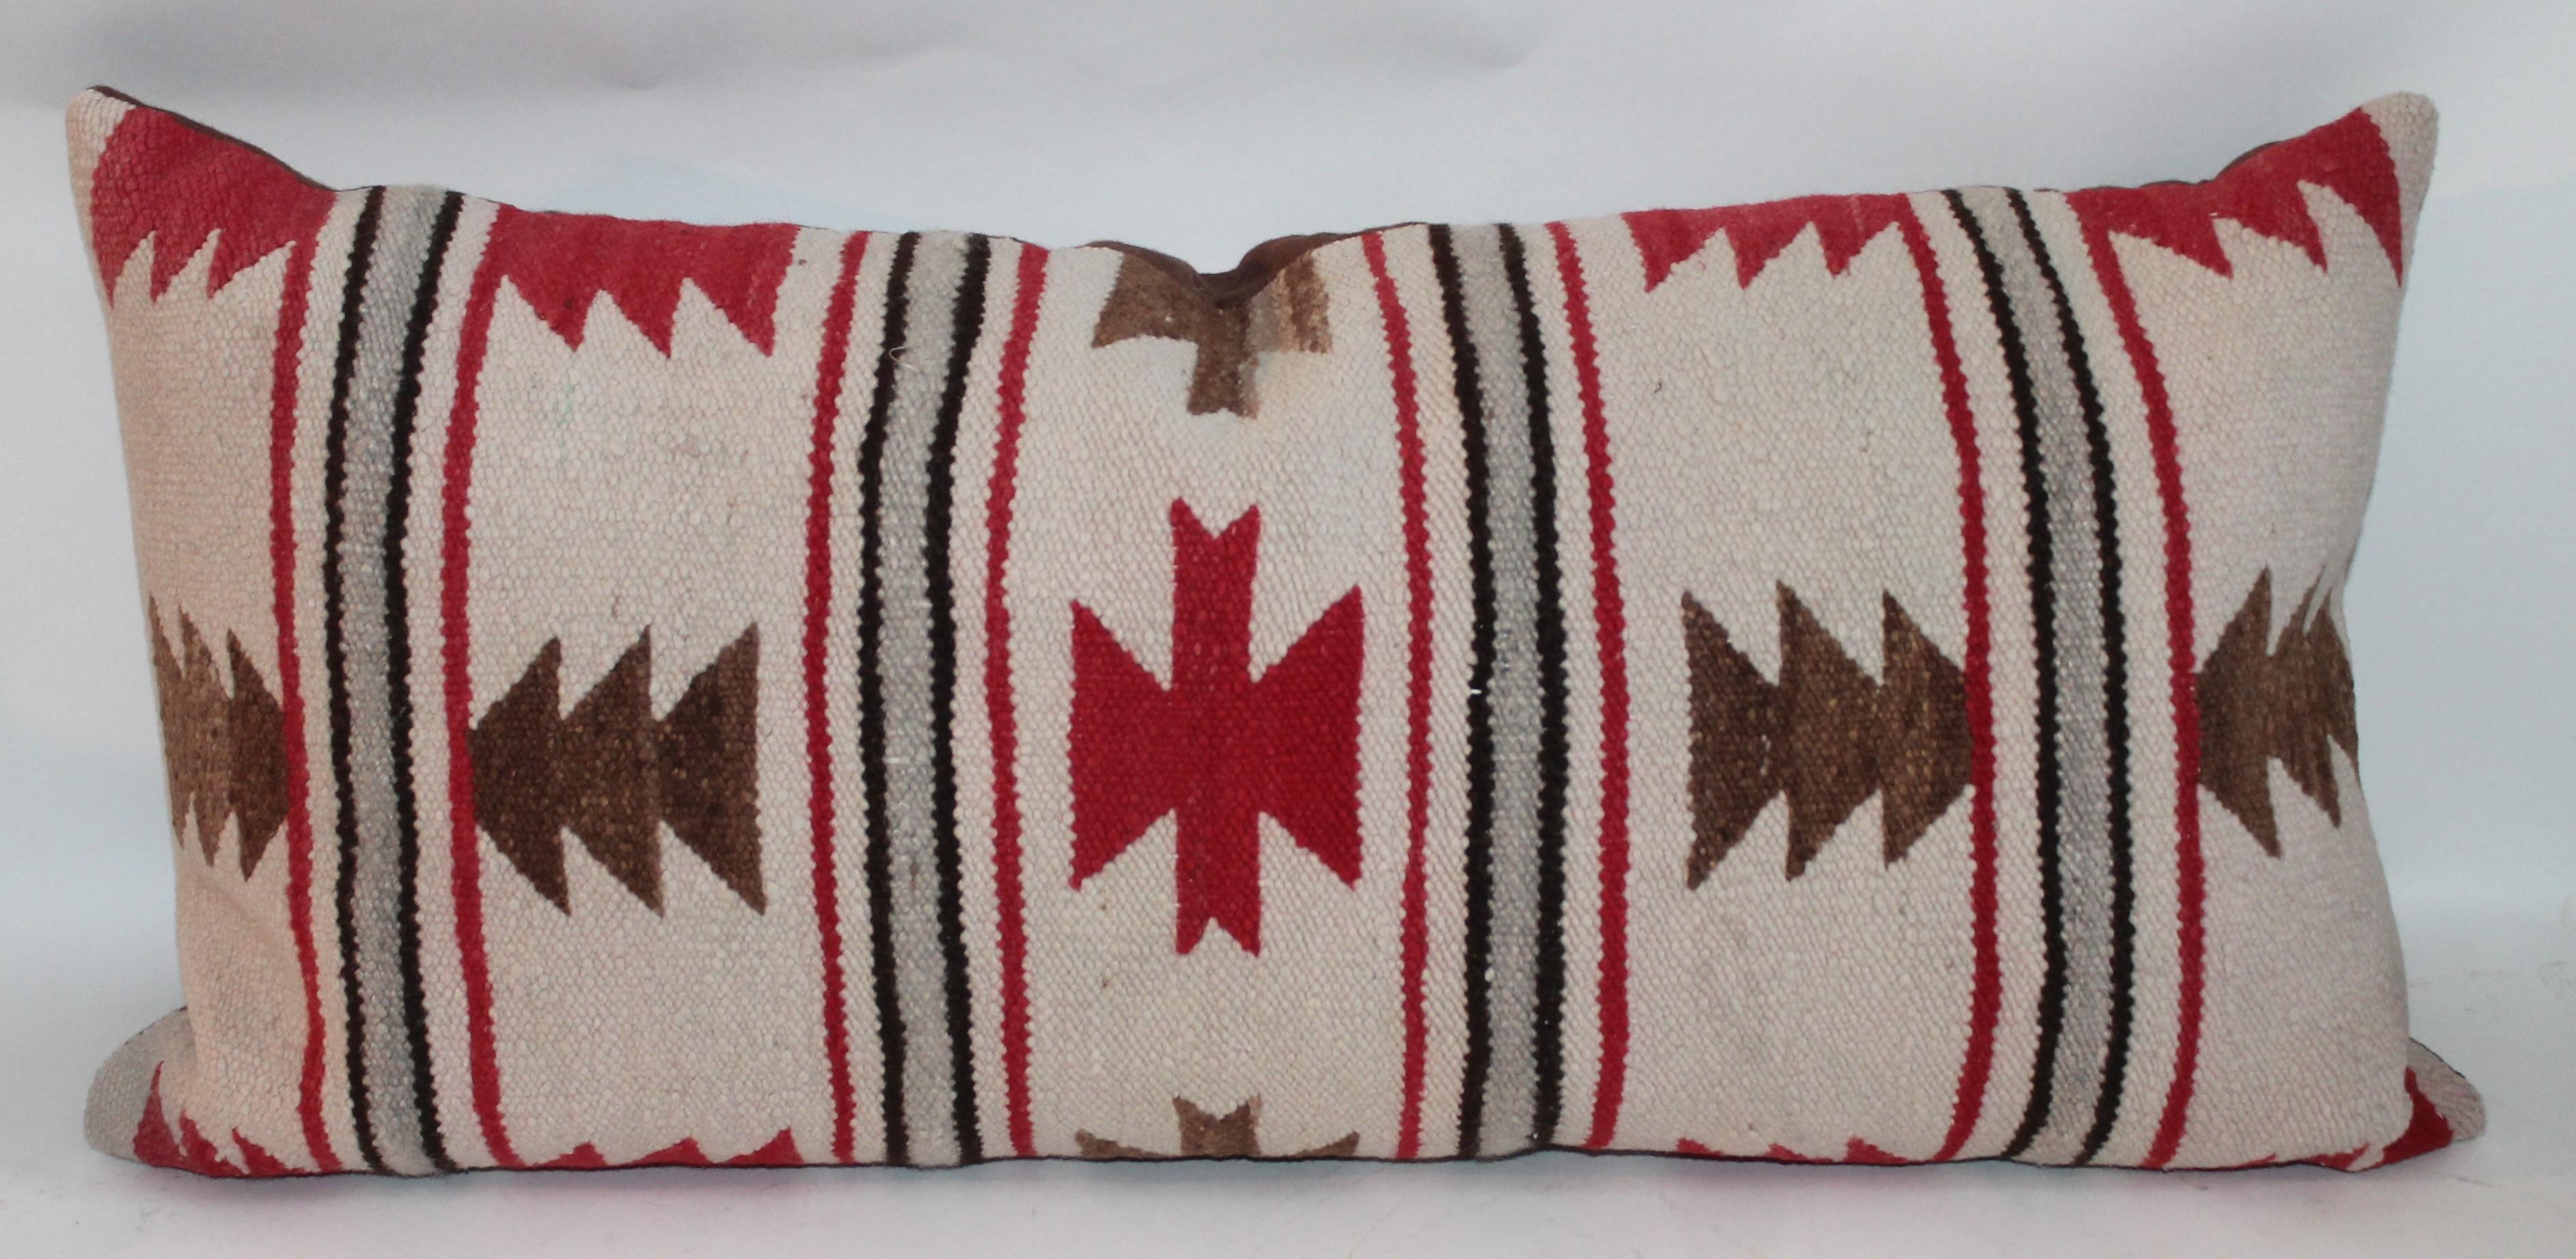 Wool Navajo Indian Weaving Bolster Pillows, Collection of Five